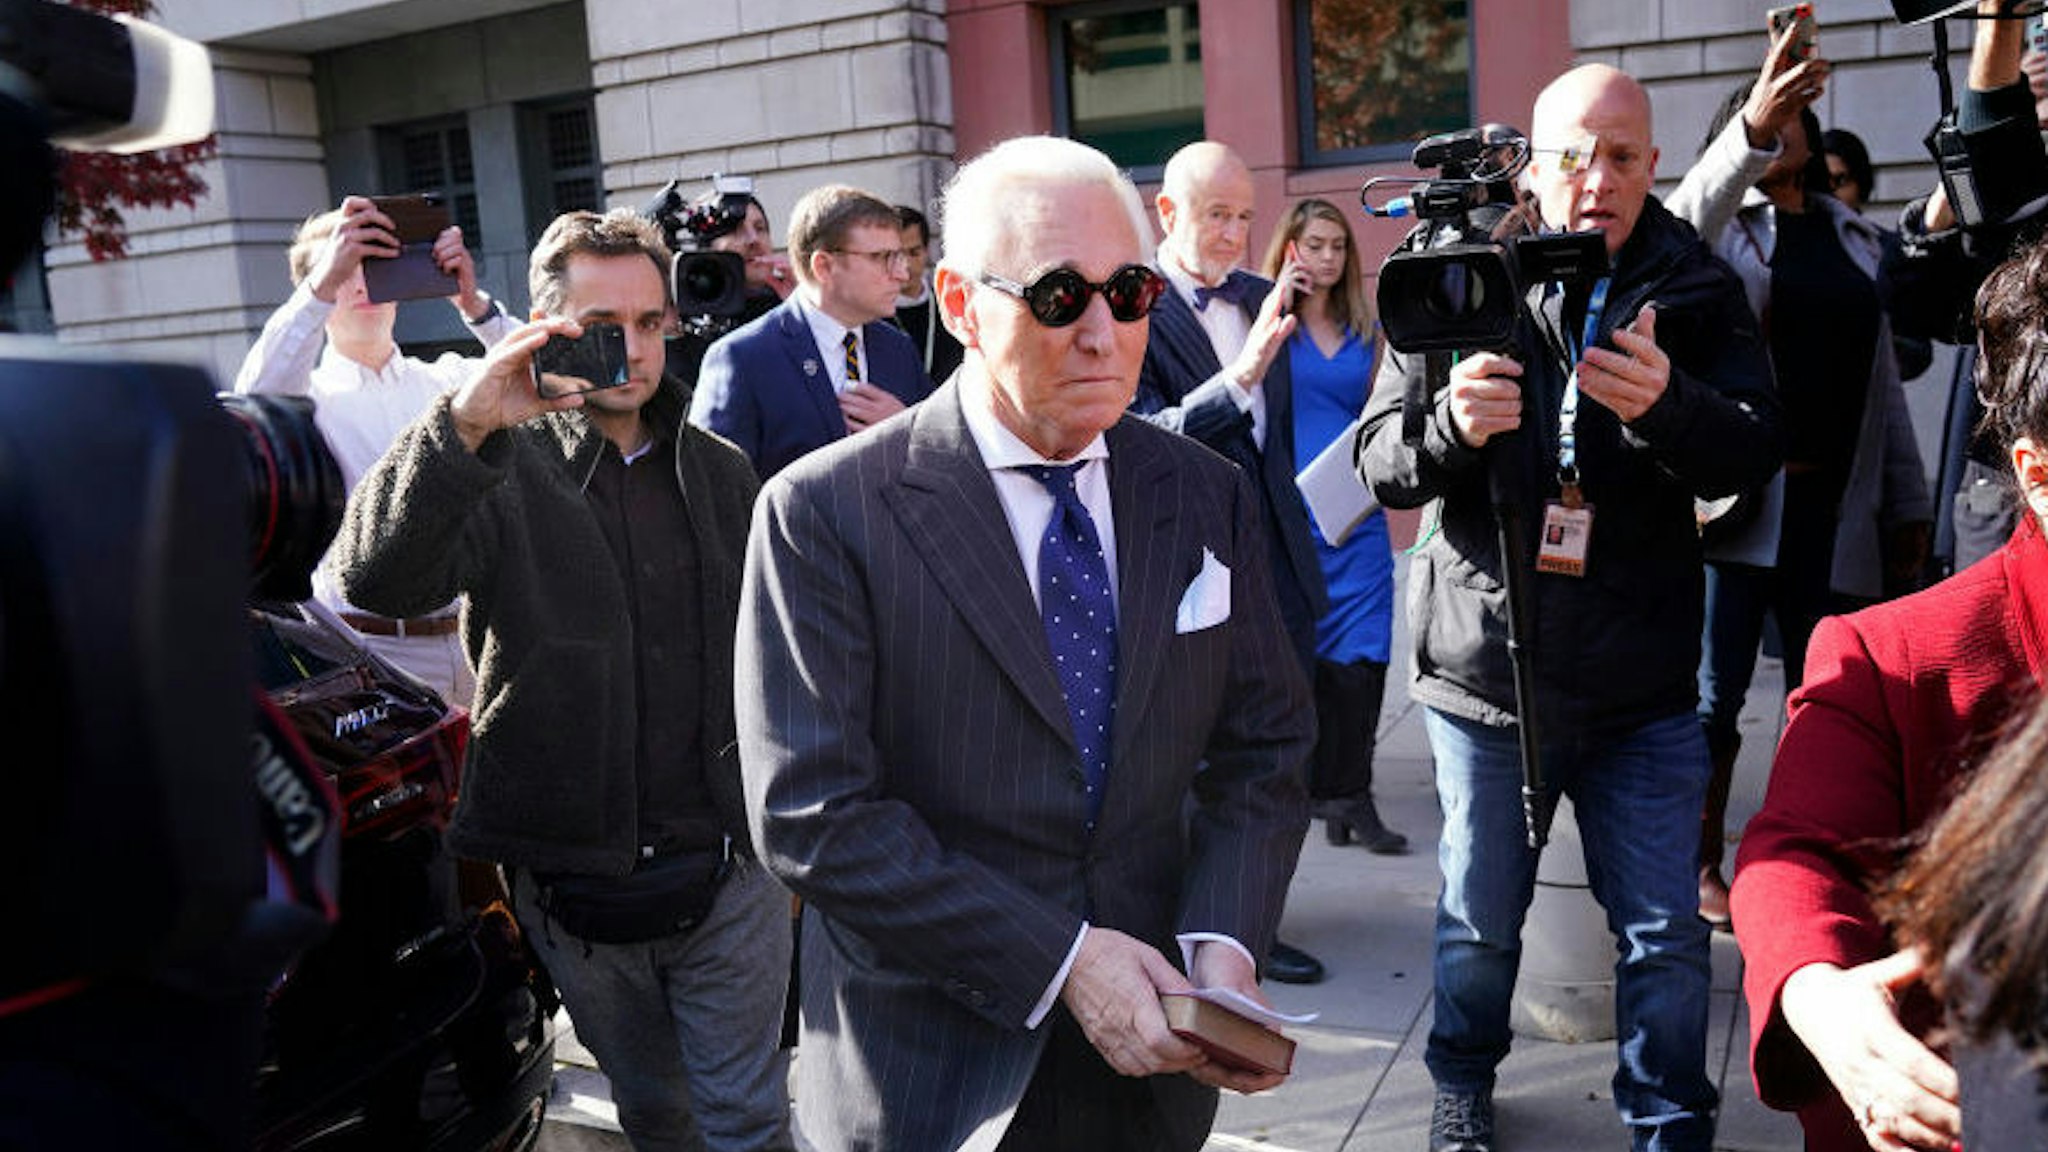 Former advisor to U.S. President Donald Trump, Roger Stone, leaves the E. Barrett Prettyman United States Courthouse after being found guilty of obstructing a congressional investigation into Russia‚Äôs interference in the 2016 election on November 15, 2019 in Washington, DC. Stone faced seven felony charges and was found guilty on all counts. (Photo by Win McNamee/Getty Images)